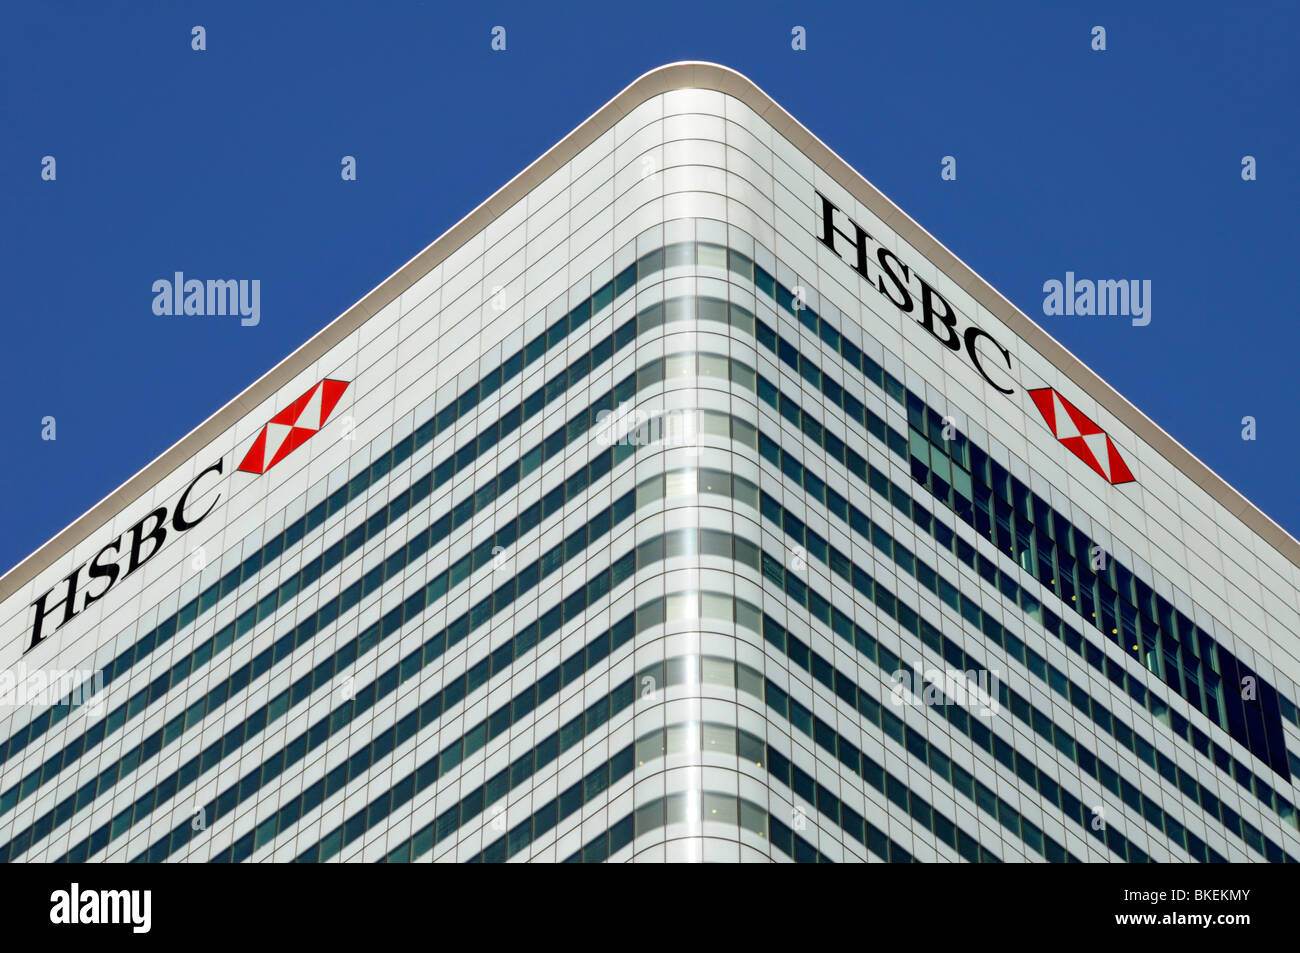 Blue sky corner view of cladding & windows to roof level HSBC bank logo signs at London Docklands Canary Wharf HQ building Tower Hamlets England UK Stock Photo